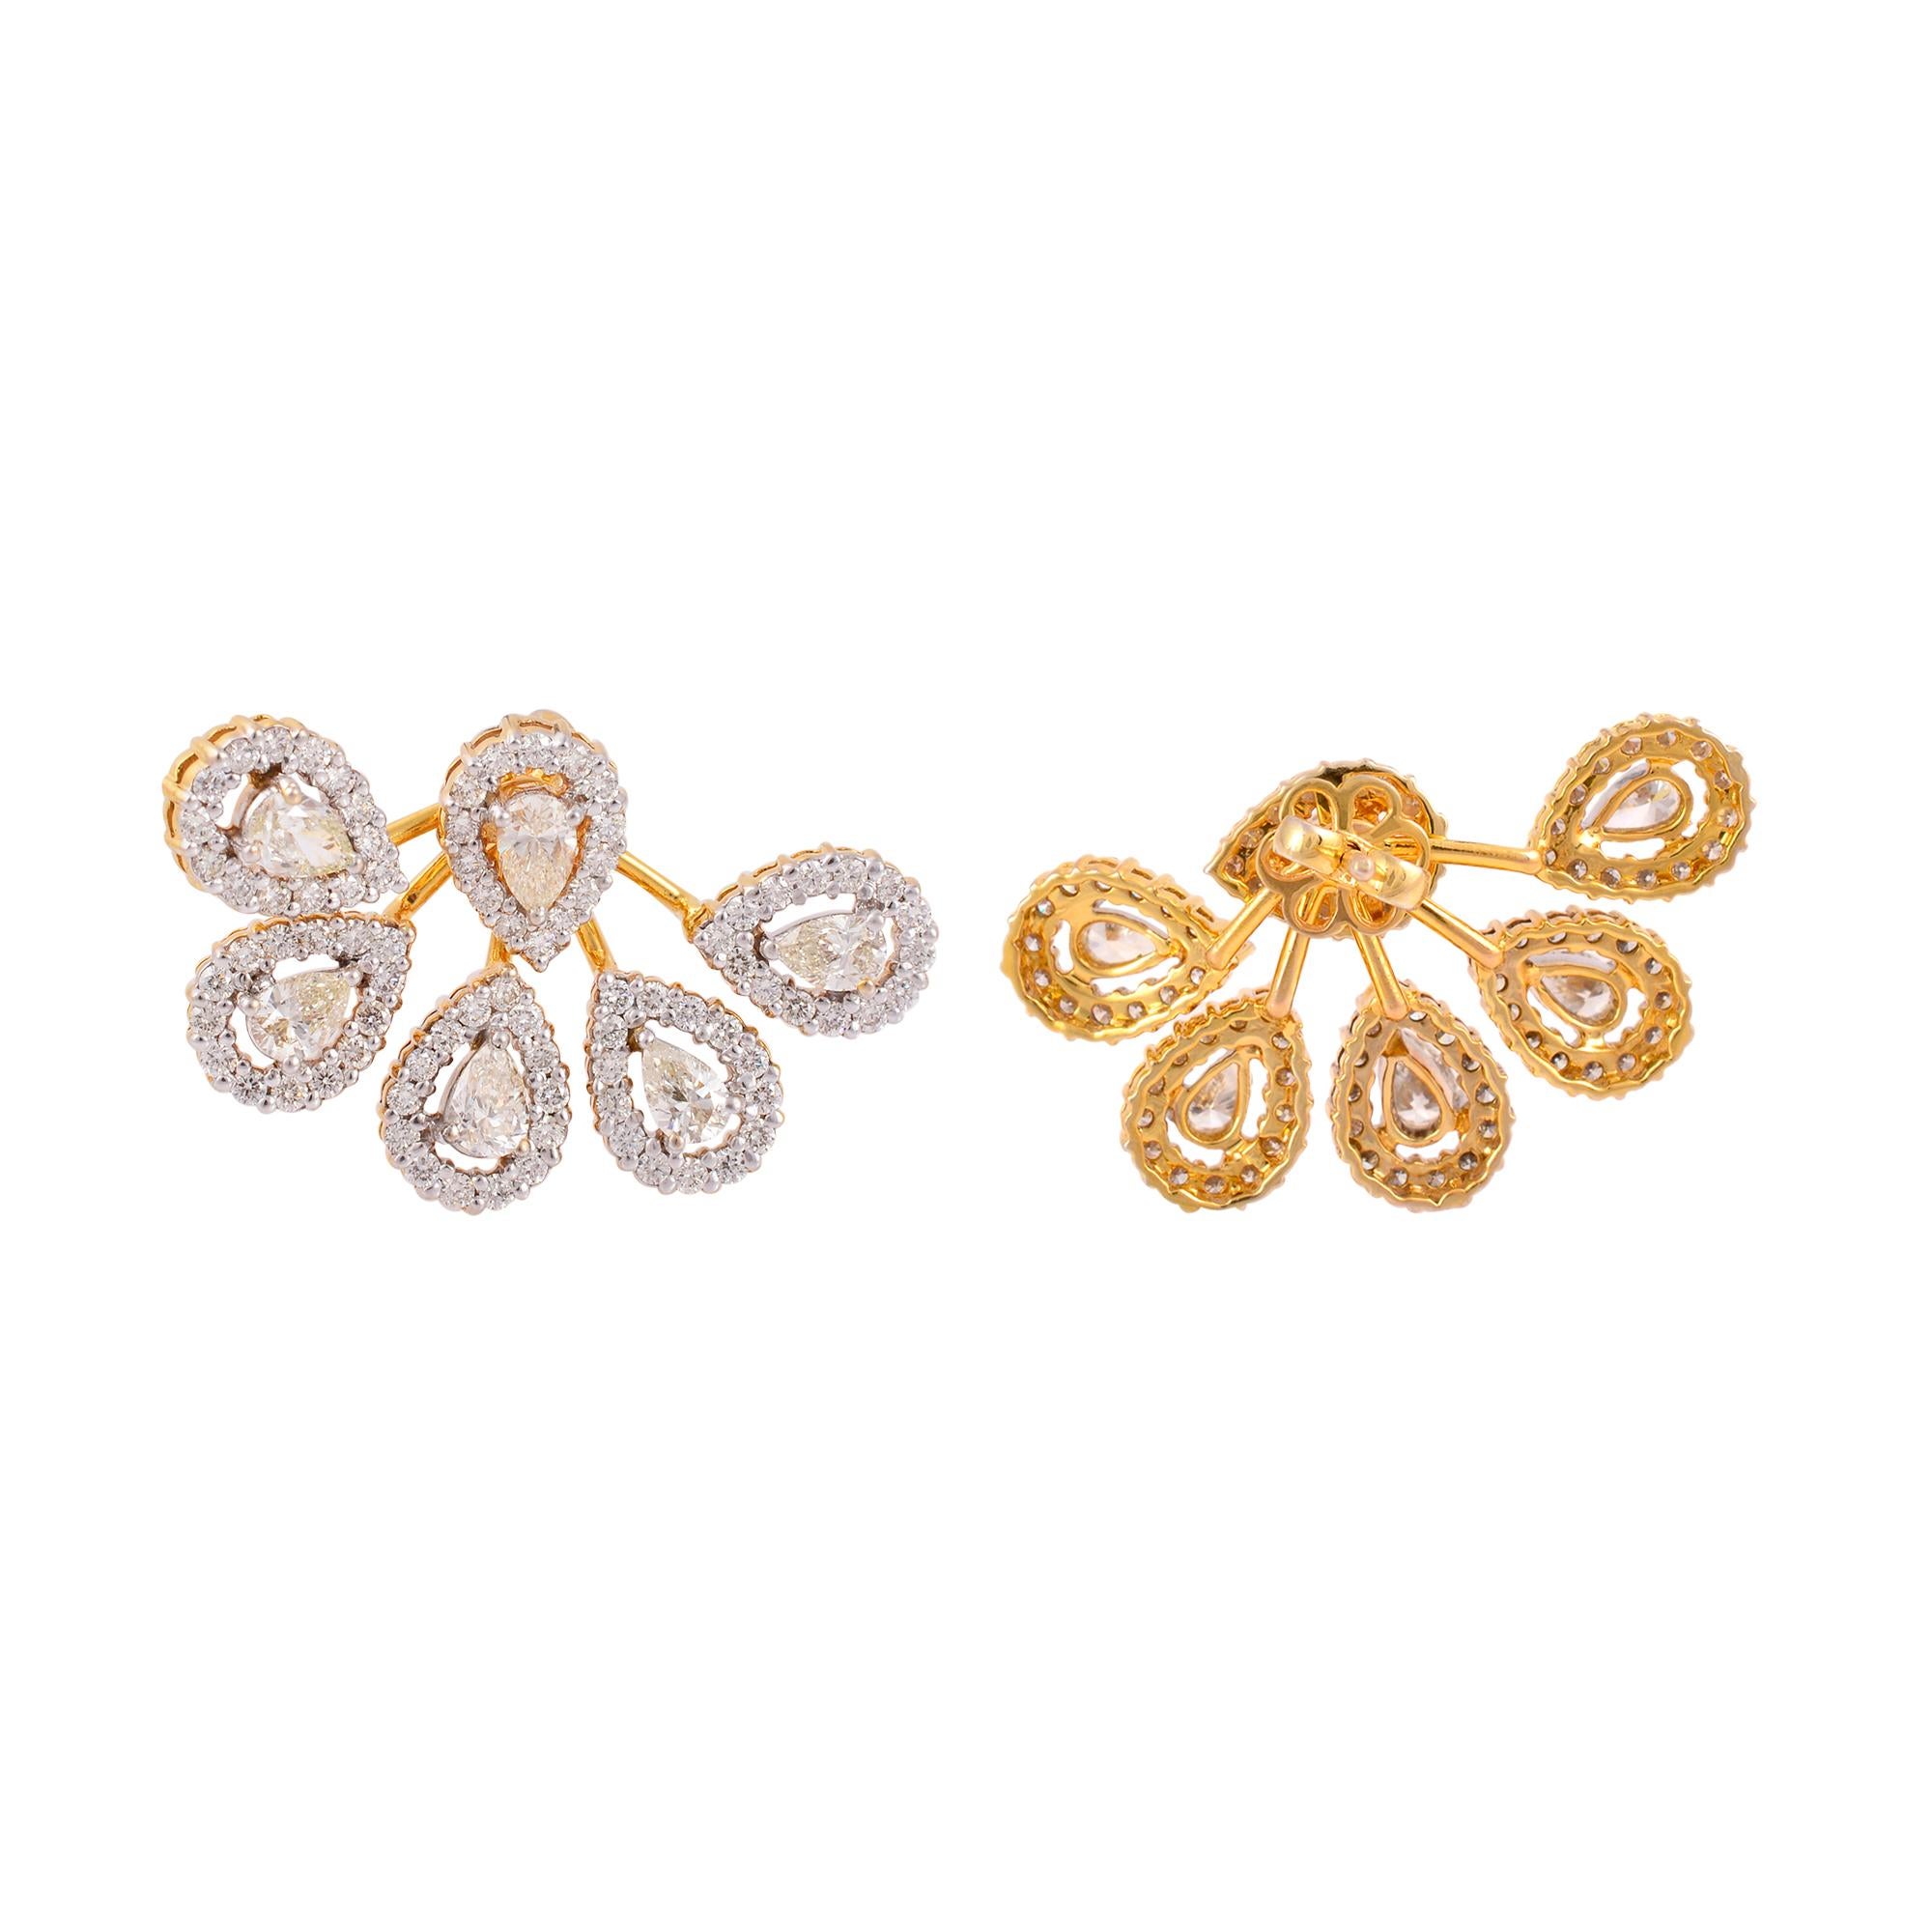 Item Code :- CN-16620
Gross Wt. :- 18.07 gm
18k Yellow Gold Wt. :- 17.17 gm
Diamond Wt. :- 4.50 Ct. ( AVERAGE DIAMOND CLARITY SI1-SI2 & COLOR H-I )
Earrings Size :- 21.44 x 35.5 mm approx.

✦ Sizing
.....................
We can adjust most items to